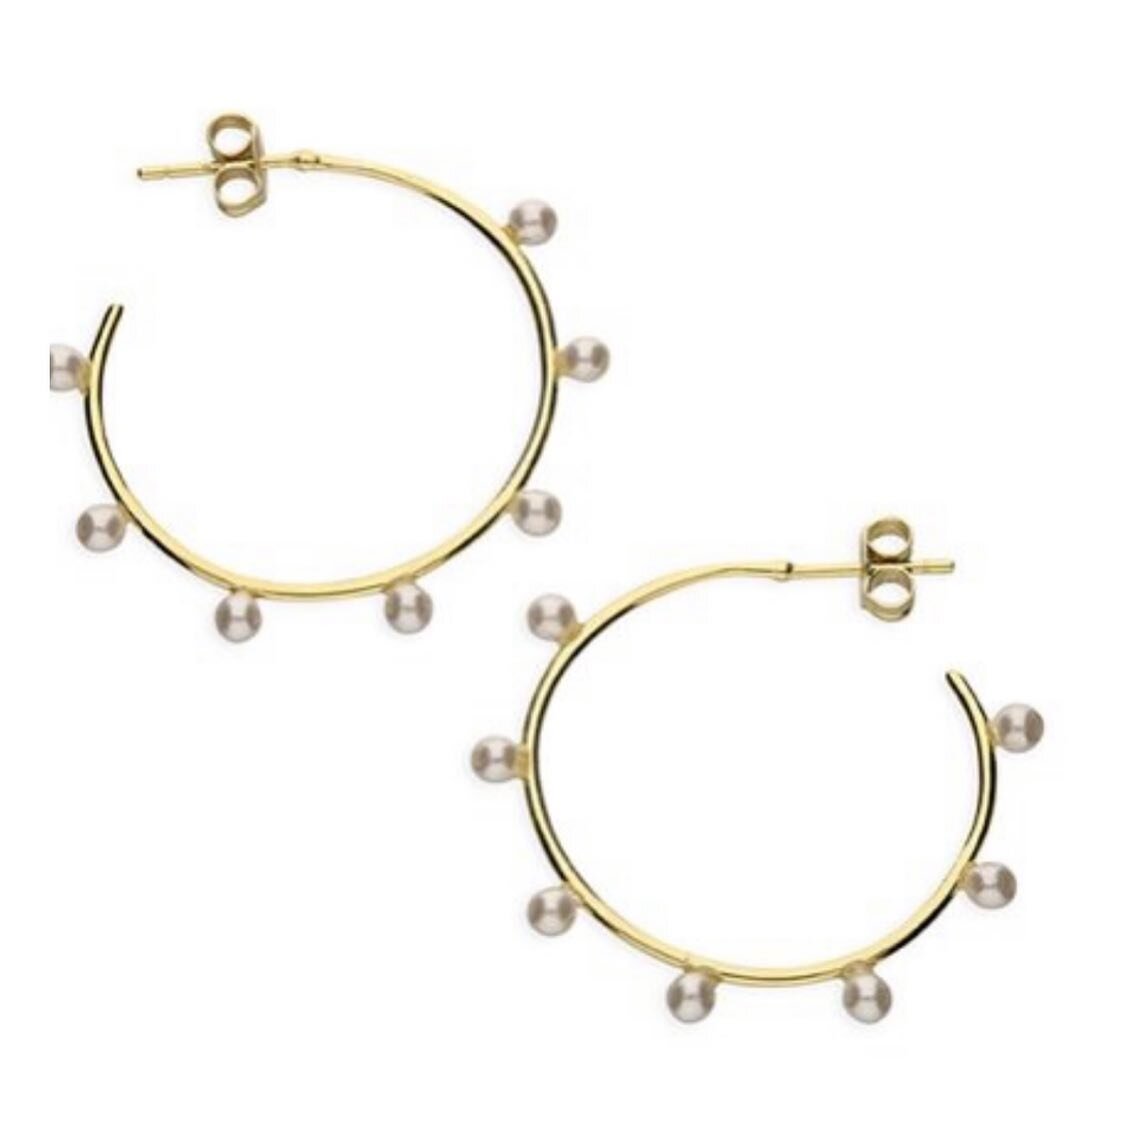 💫 NEW IN: Pearl Studded Hoops in gold vermeil. 
⭐️ Reinventing a classic. Just perfect- everyday, jewellery!
👉 Swipe to see @larajuliadebiasi wearing them so well! 
.
.
.
#studded #hip #cool #reinventingaclassic #earrings #pearls #mystyle #choiceof